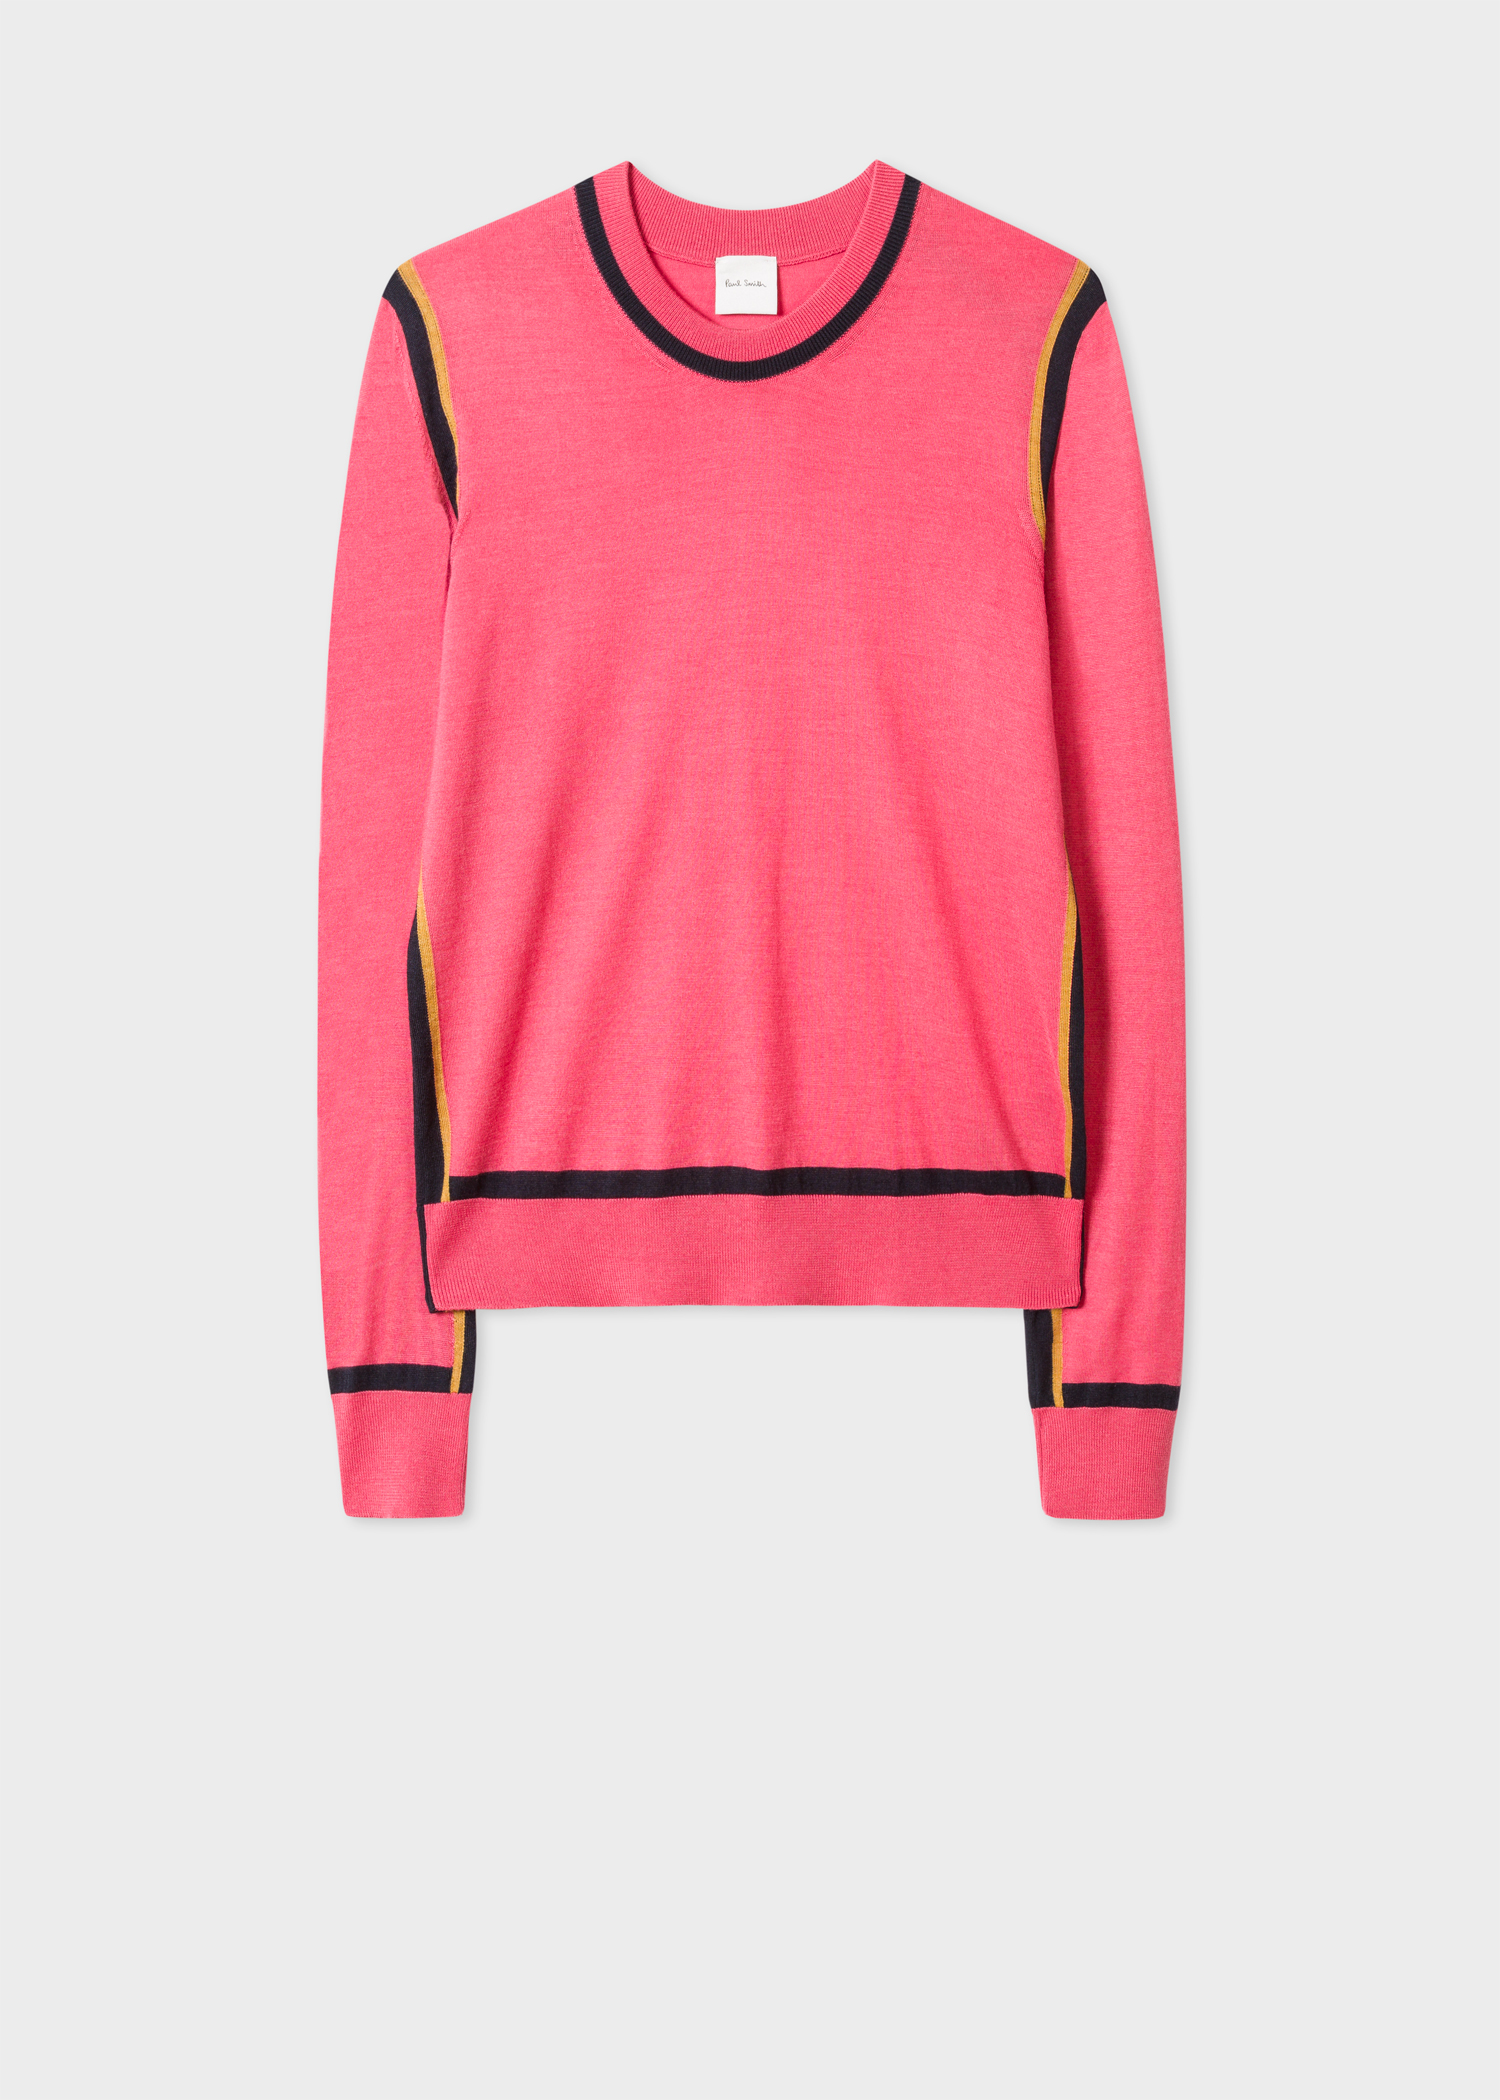 Front View - Women's Pink Wool And Silk Sweater With Dark Navy Trims Paul Smith